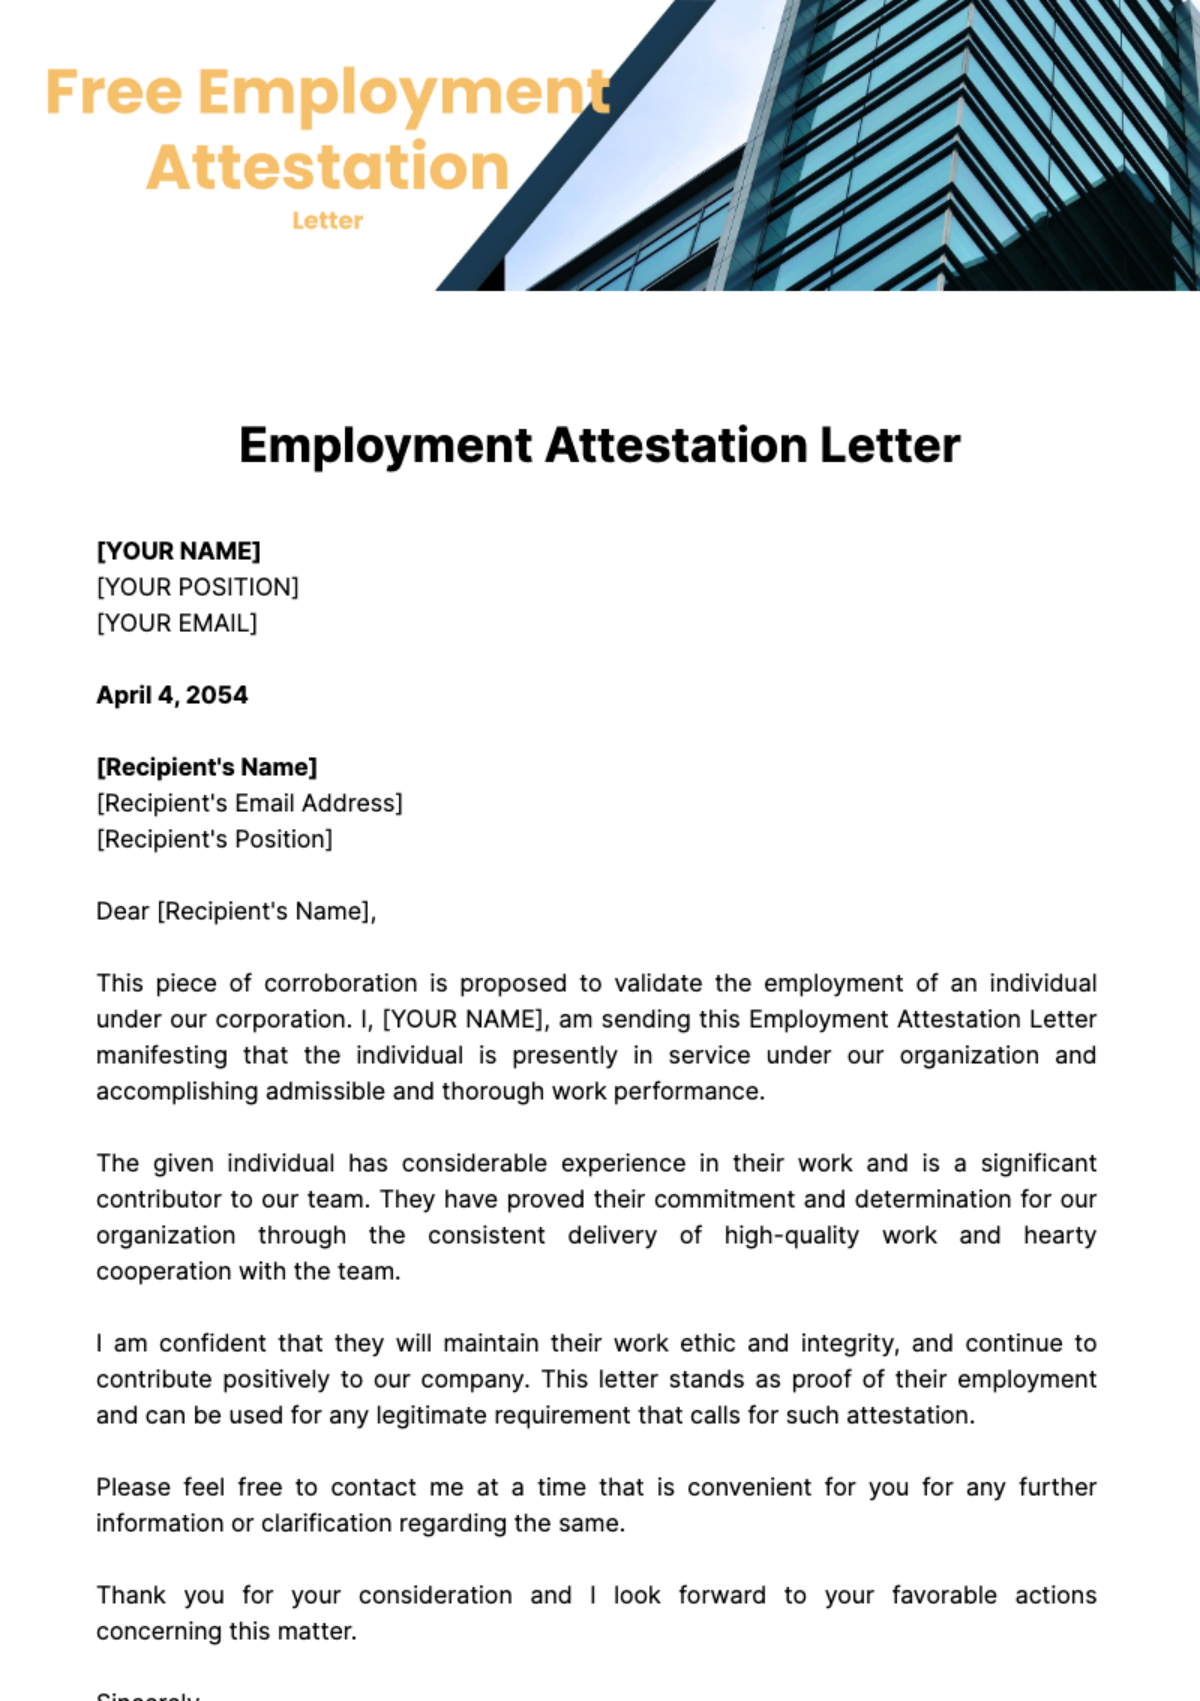 Employment Attestation Letter Template